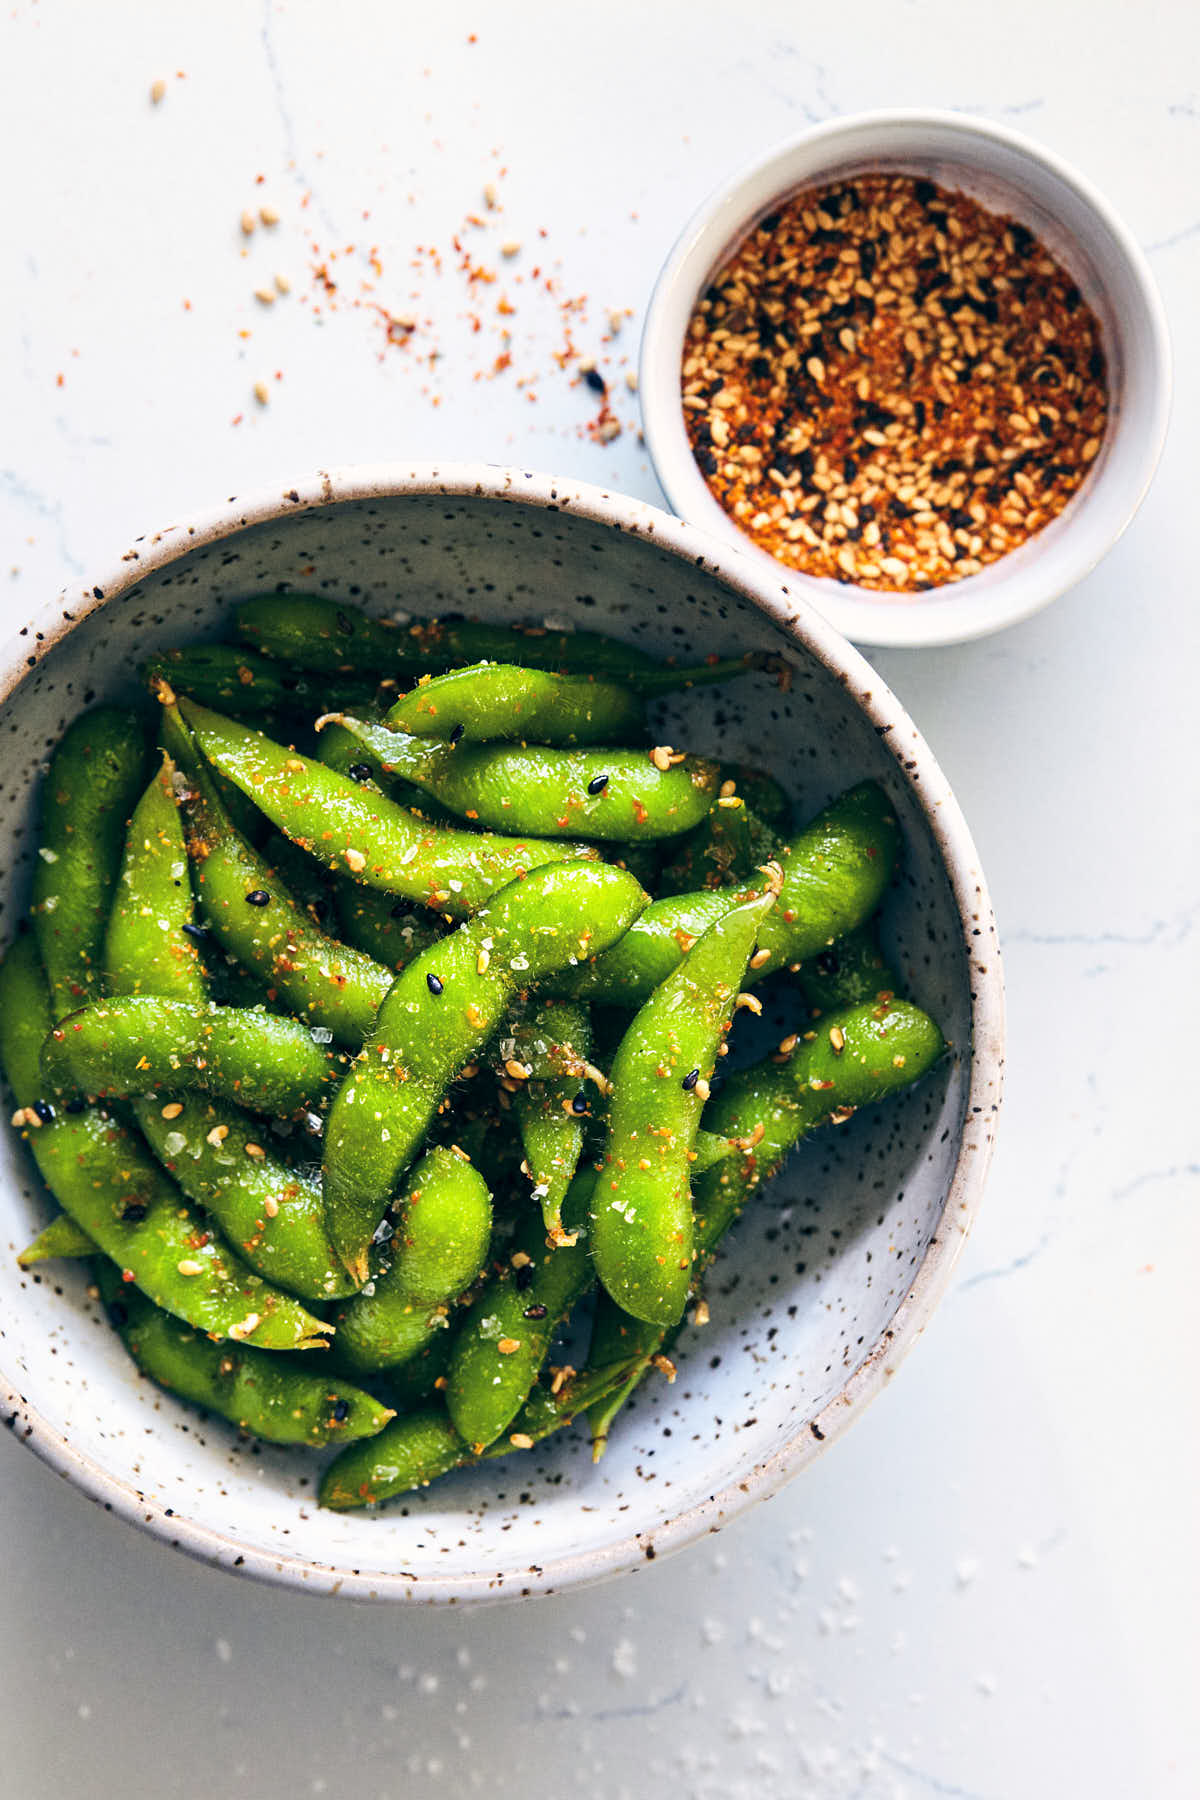 Sesame spiced edamame in a bowl before eating